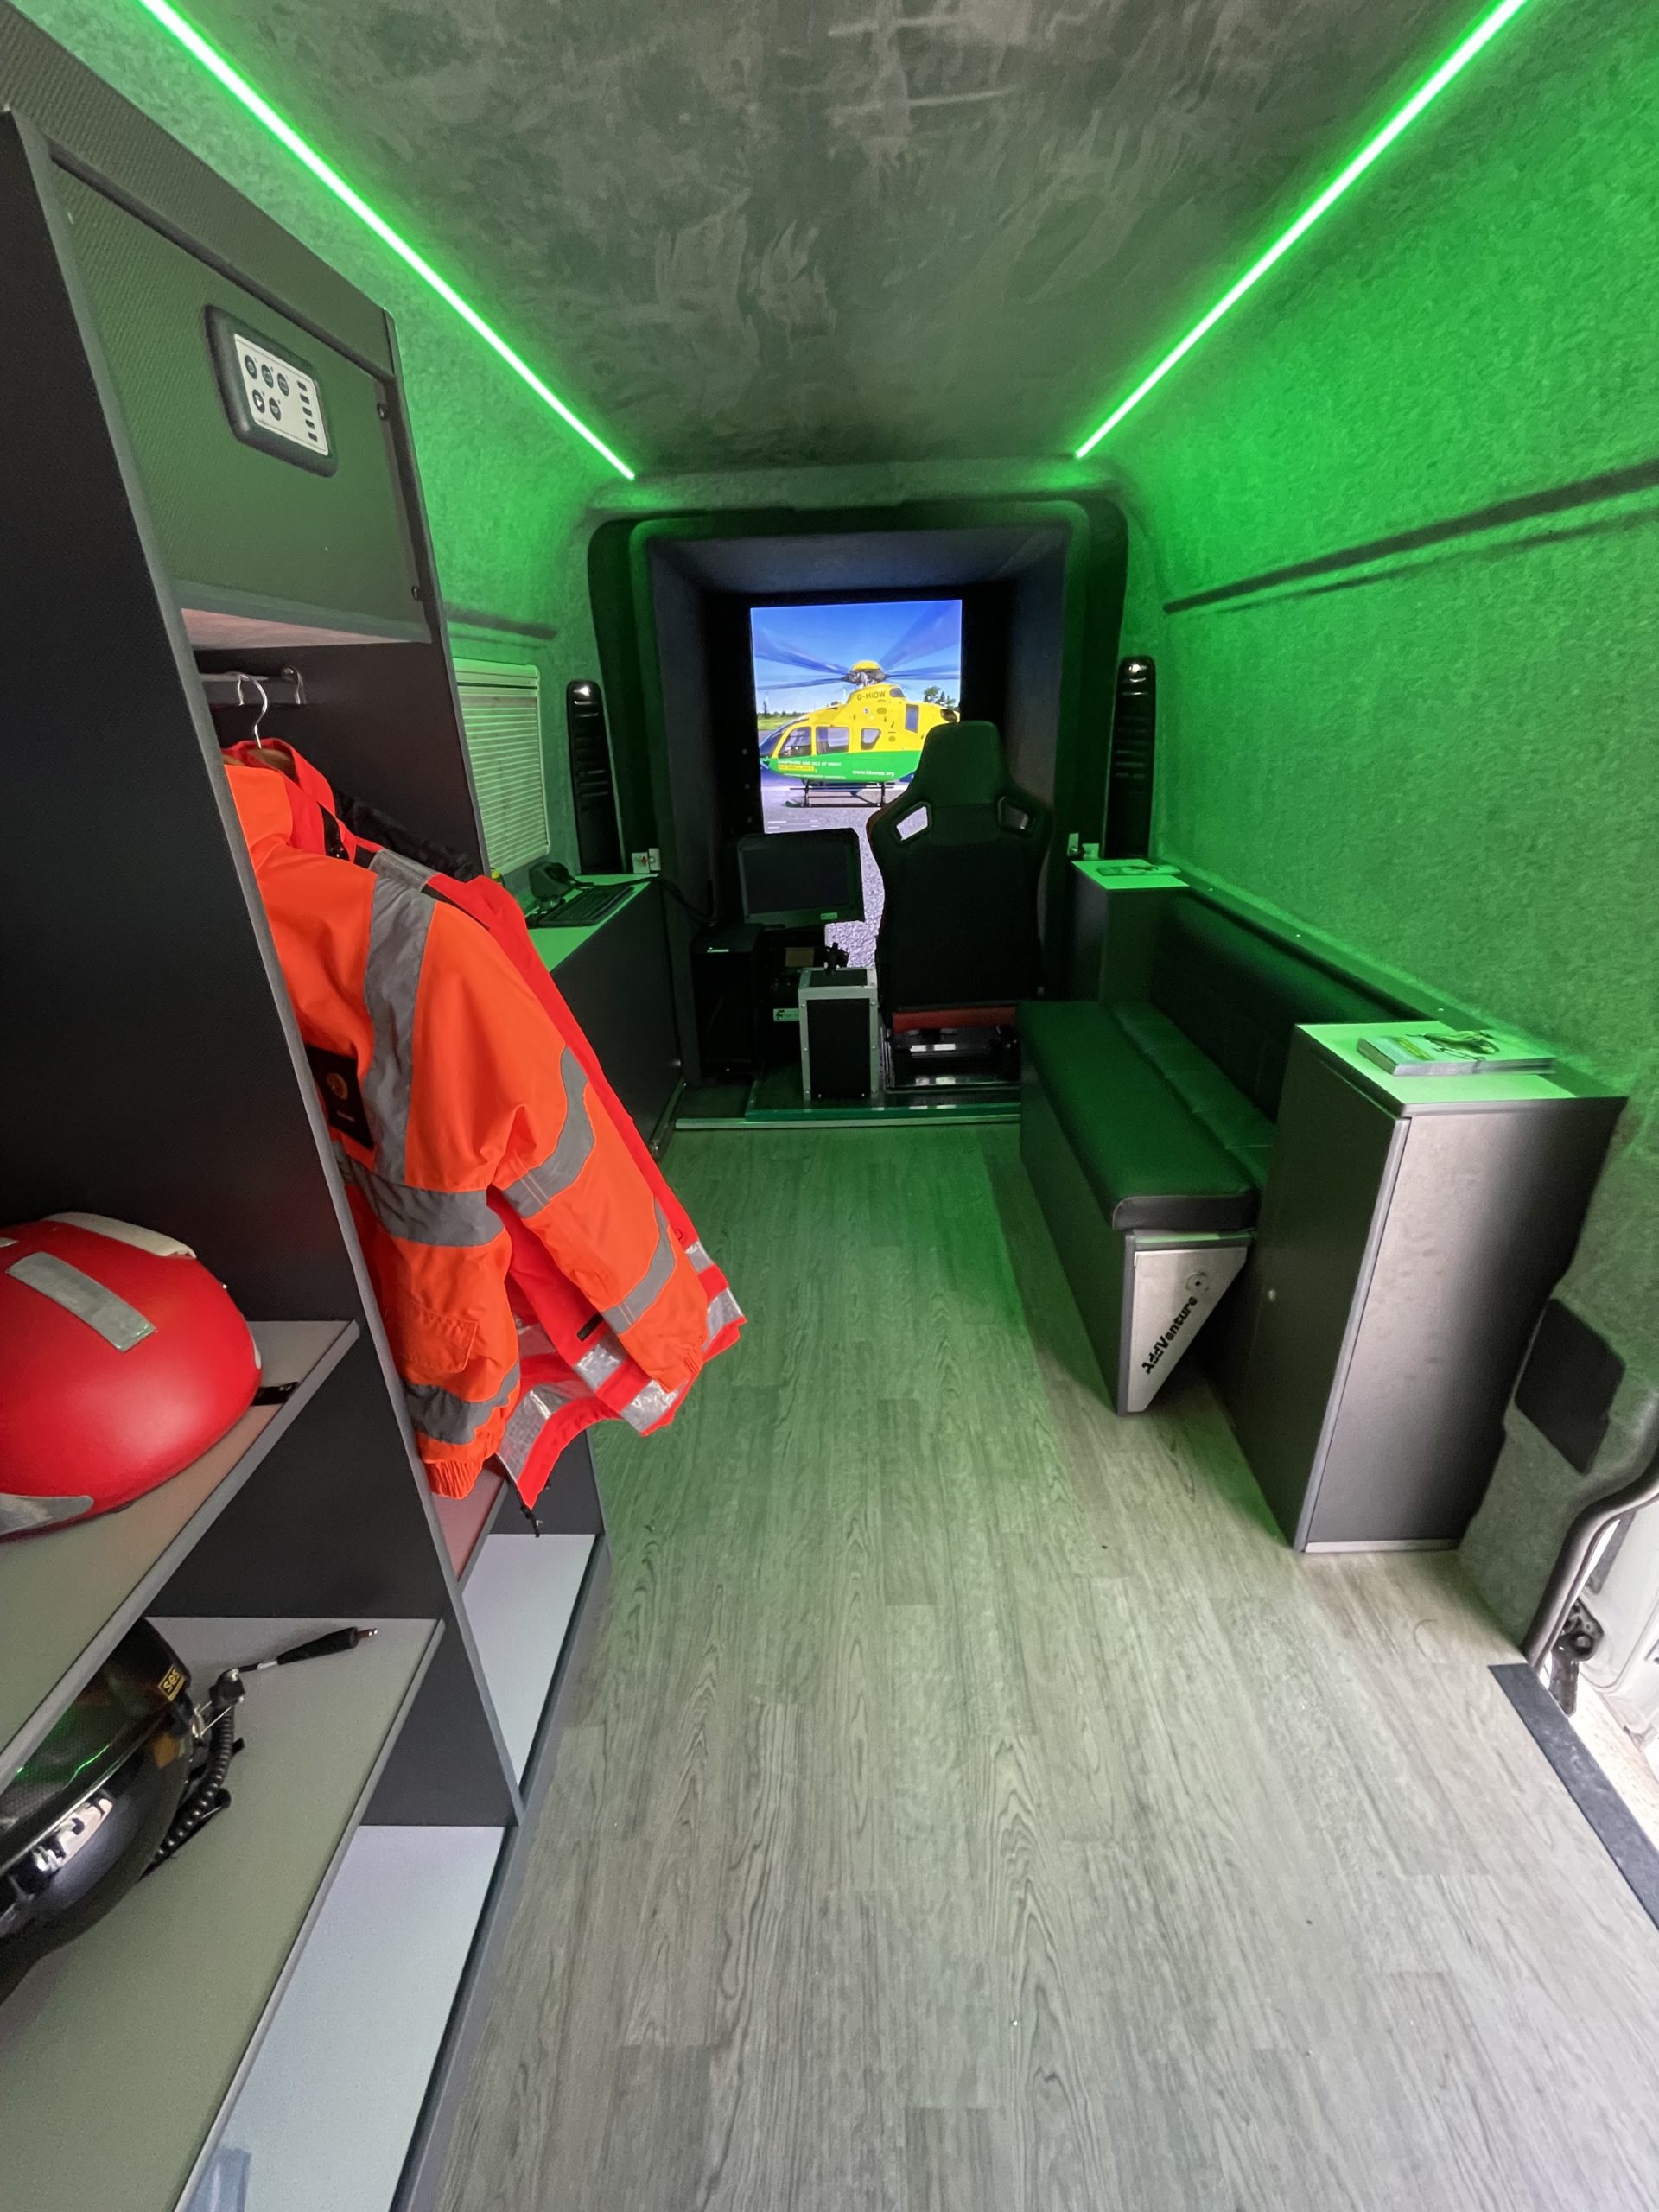 Inside a van that has been converted into a flight simulator. Orange aircrew flight jackets and helmets are hanging up.